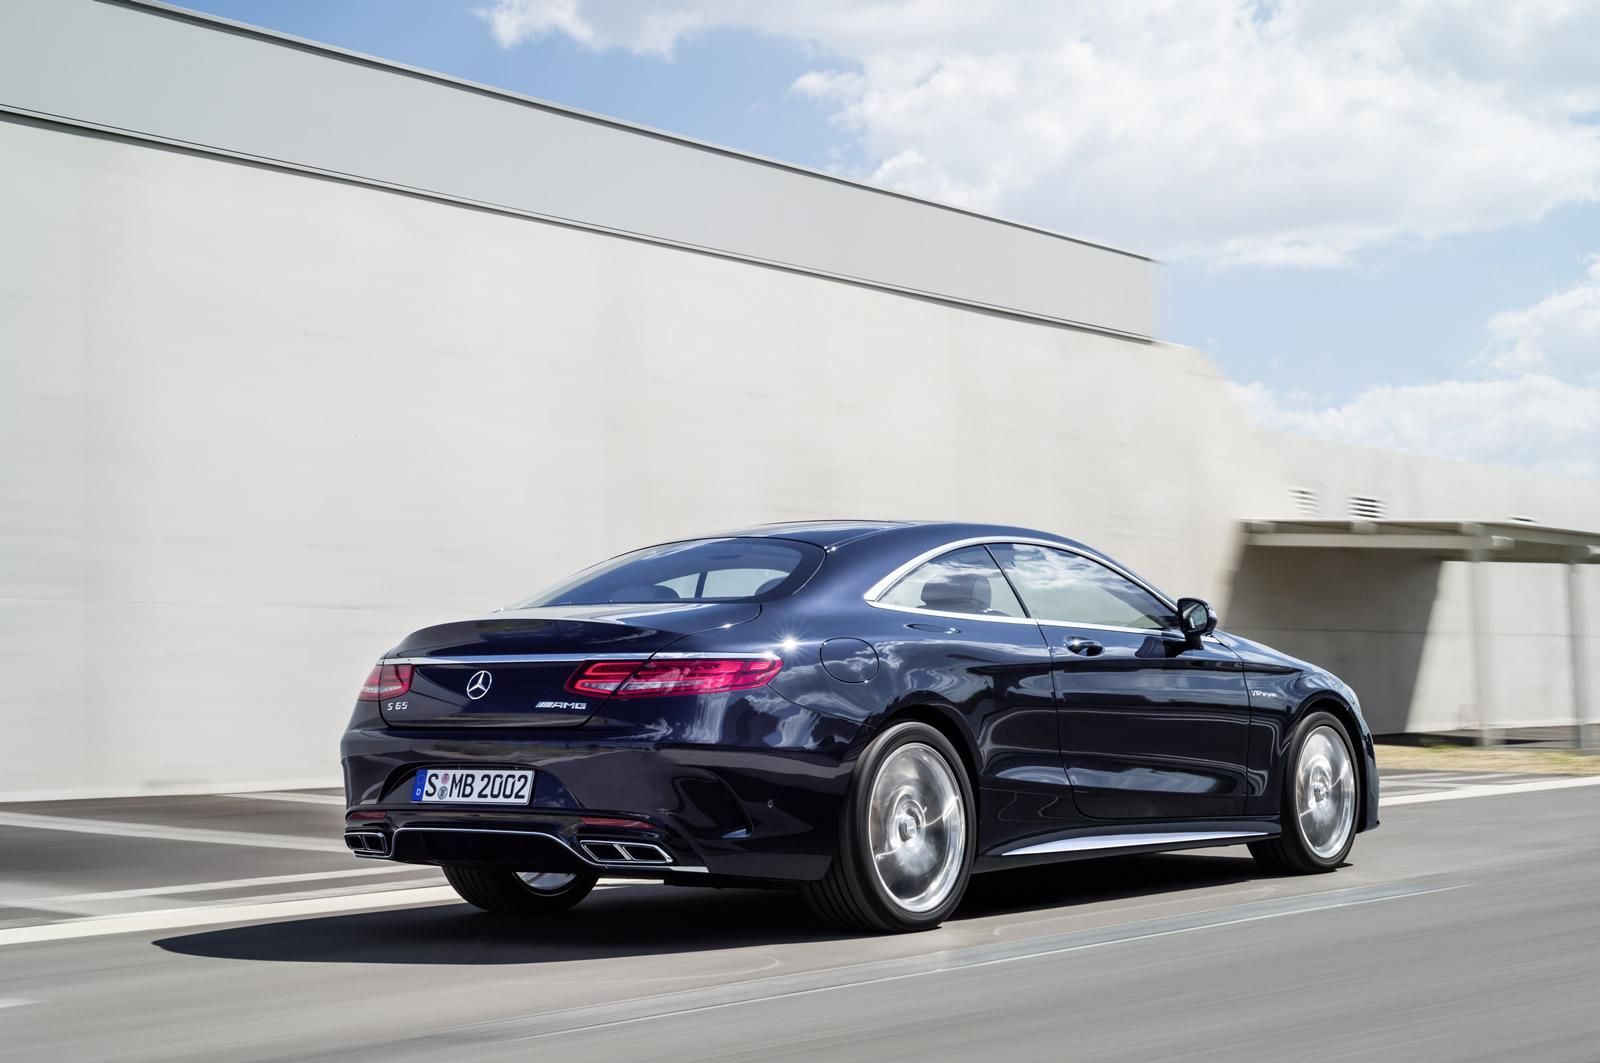 MERCEDES S65 AMG COUPE RESM GALERS